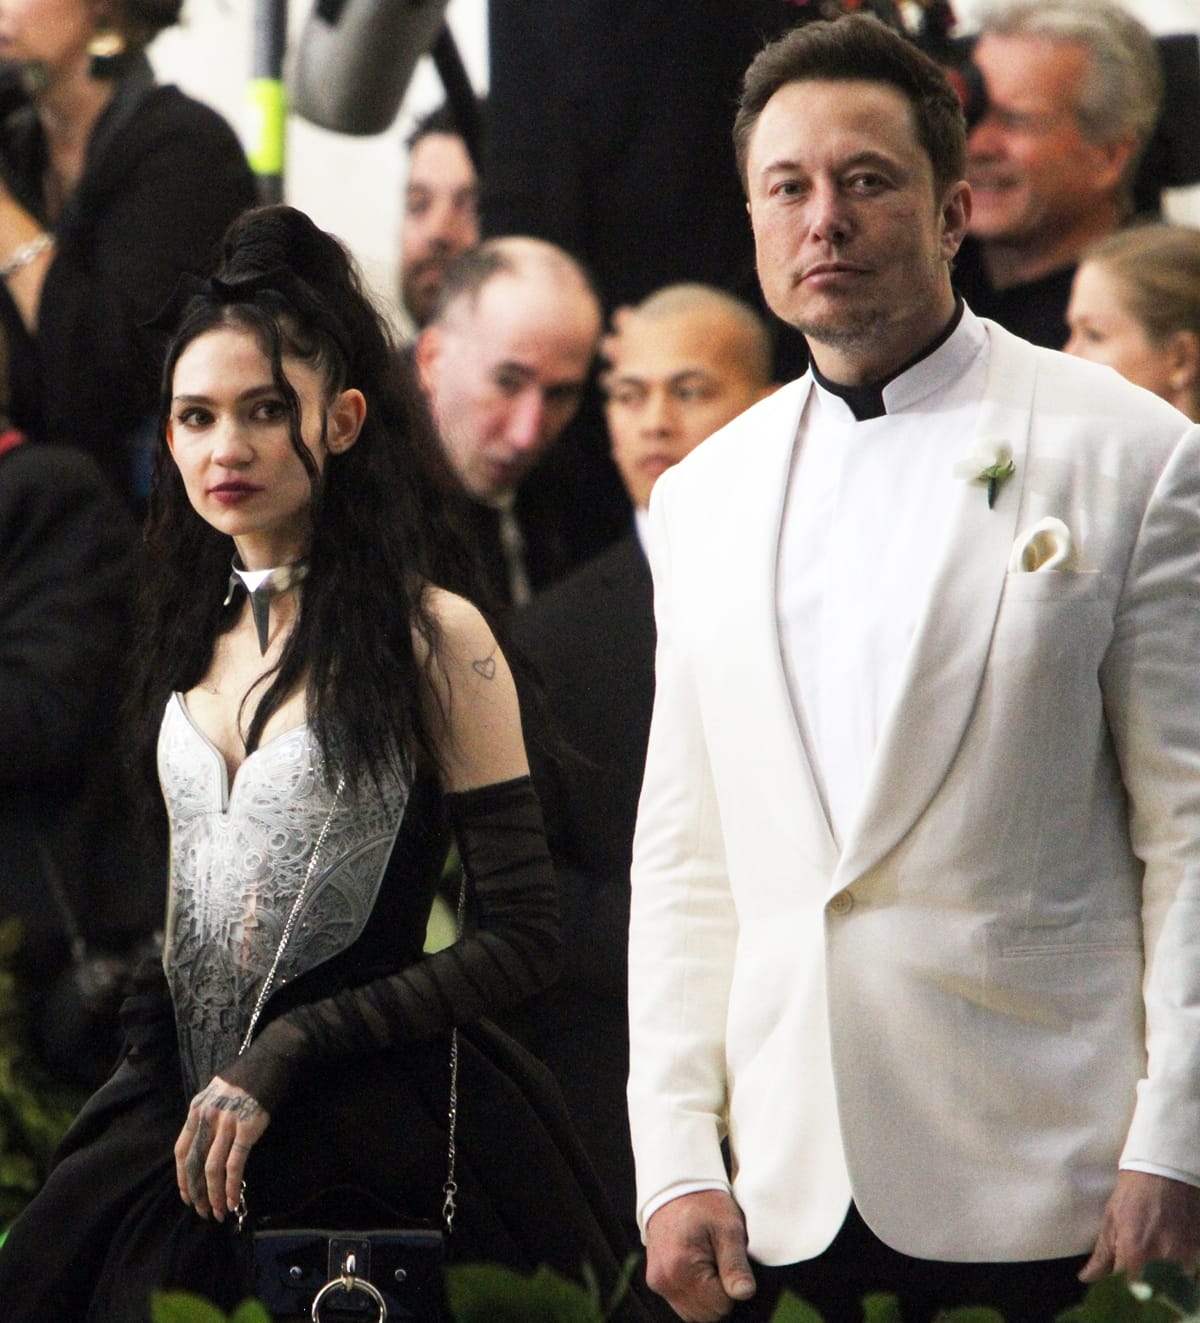 Elon Musk and Grimes reportedly split in early 2022 after welcoming a second child